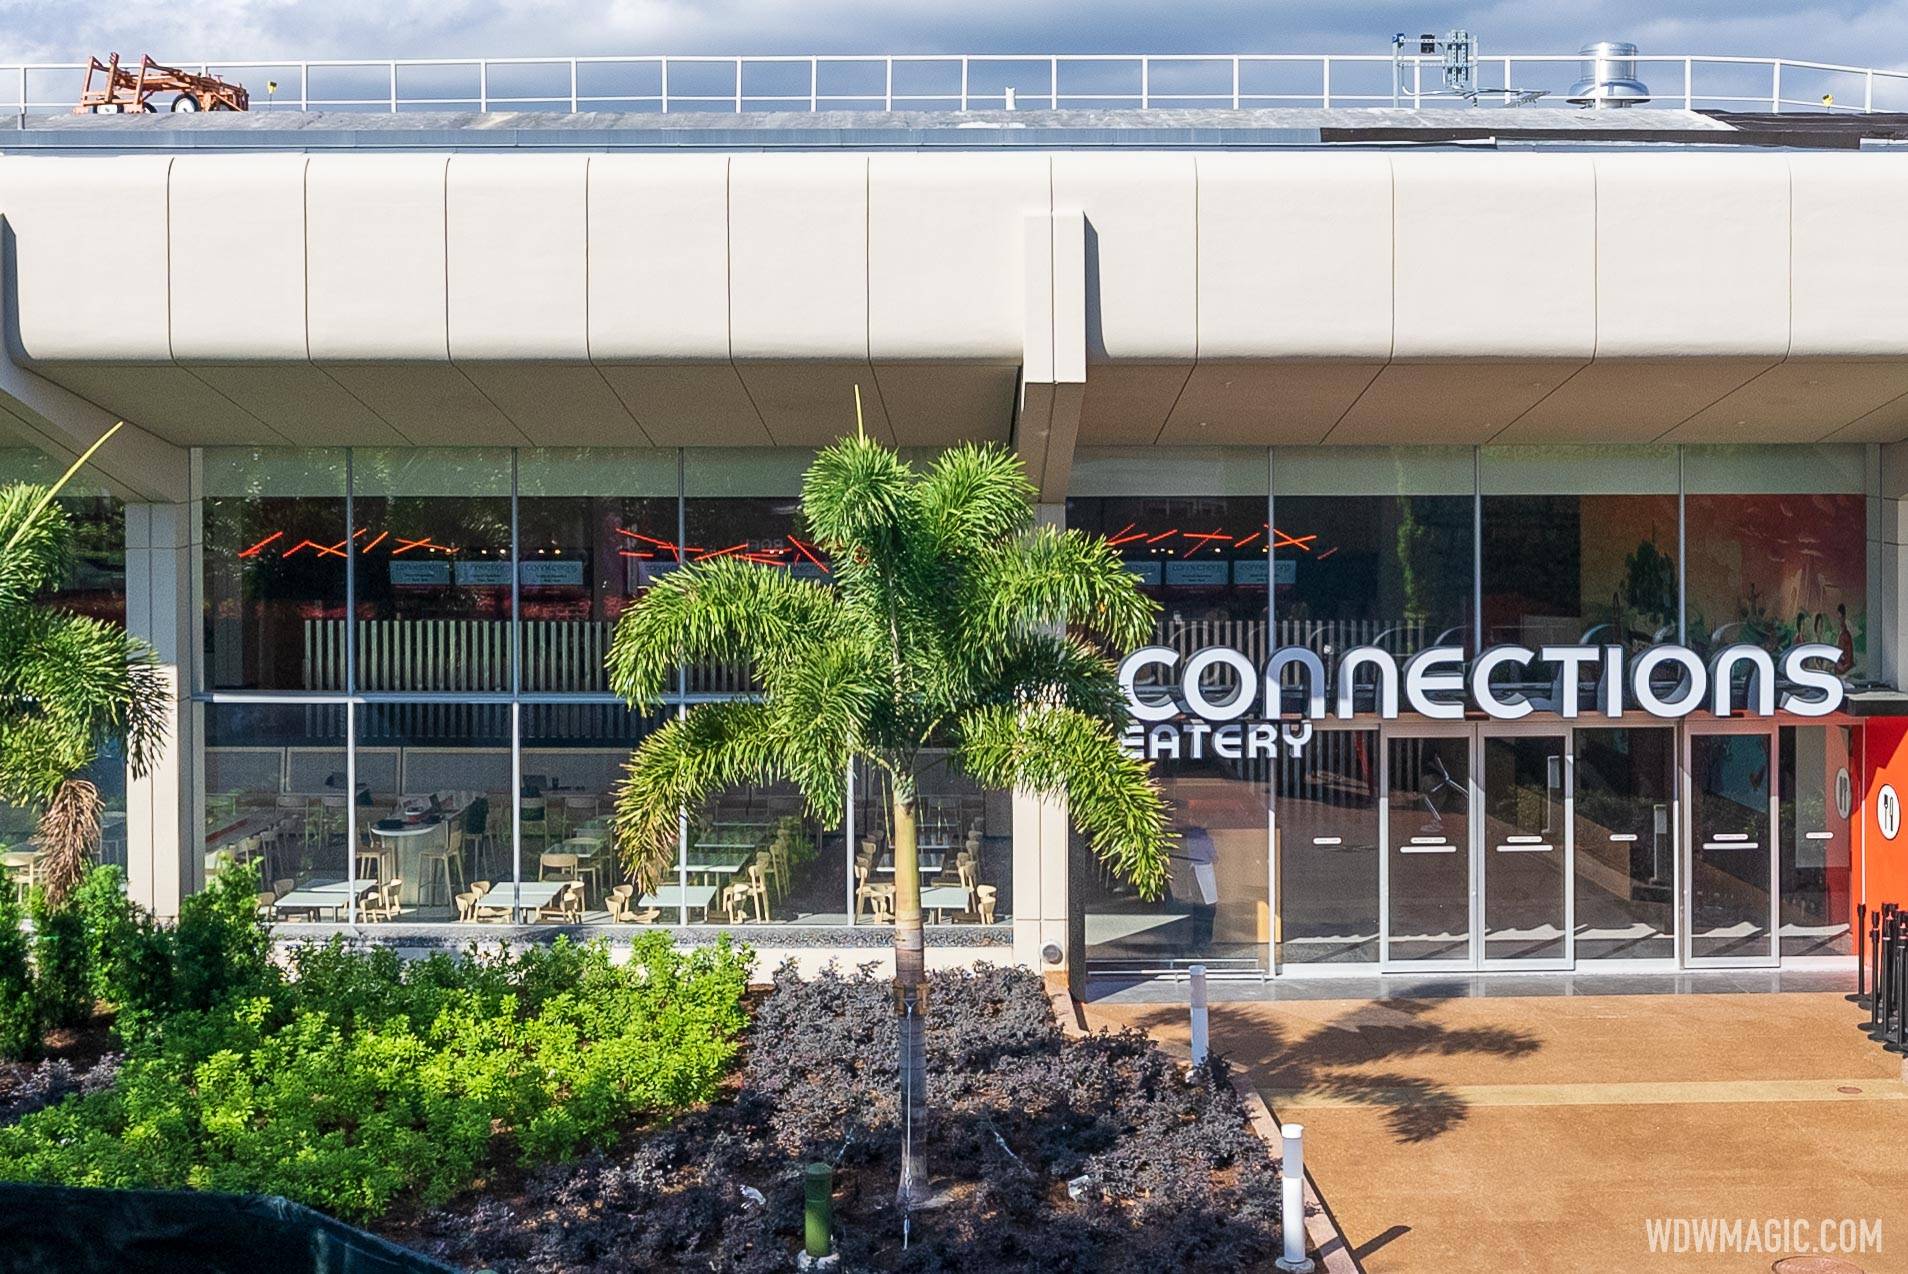 Connections Café Eatery viewed from the monorail